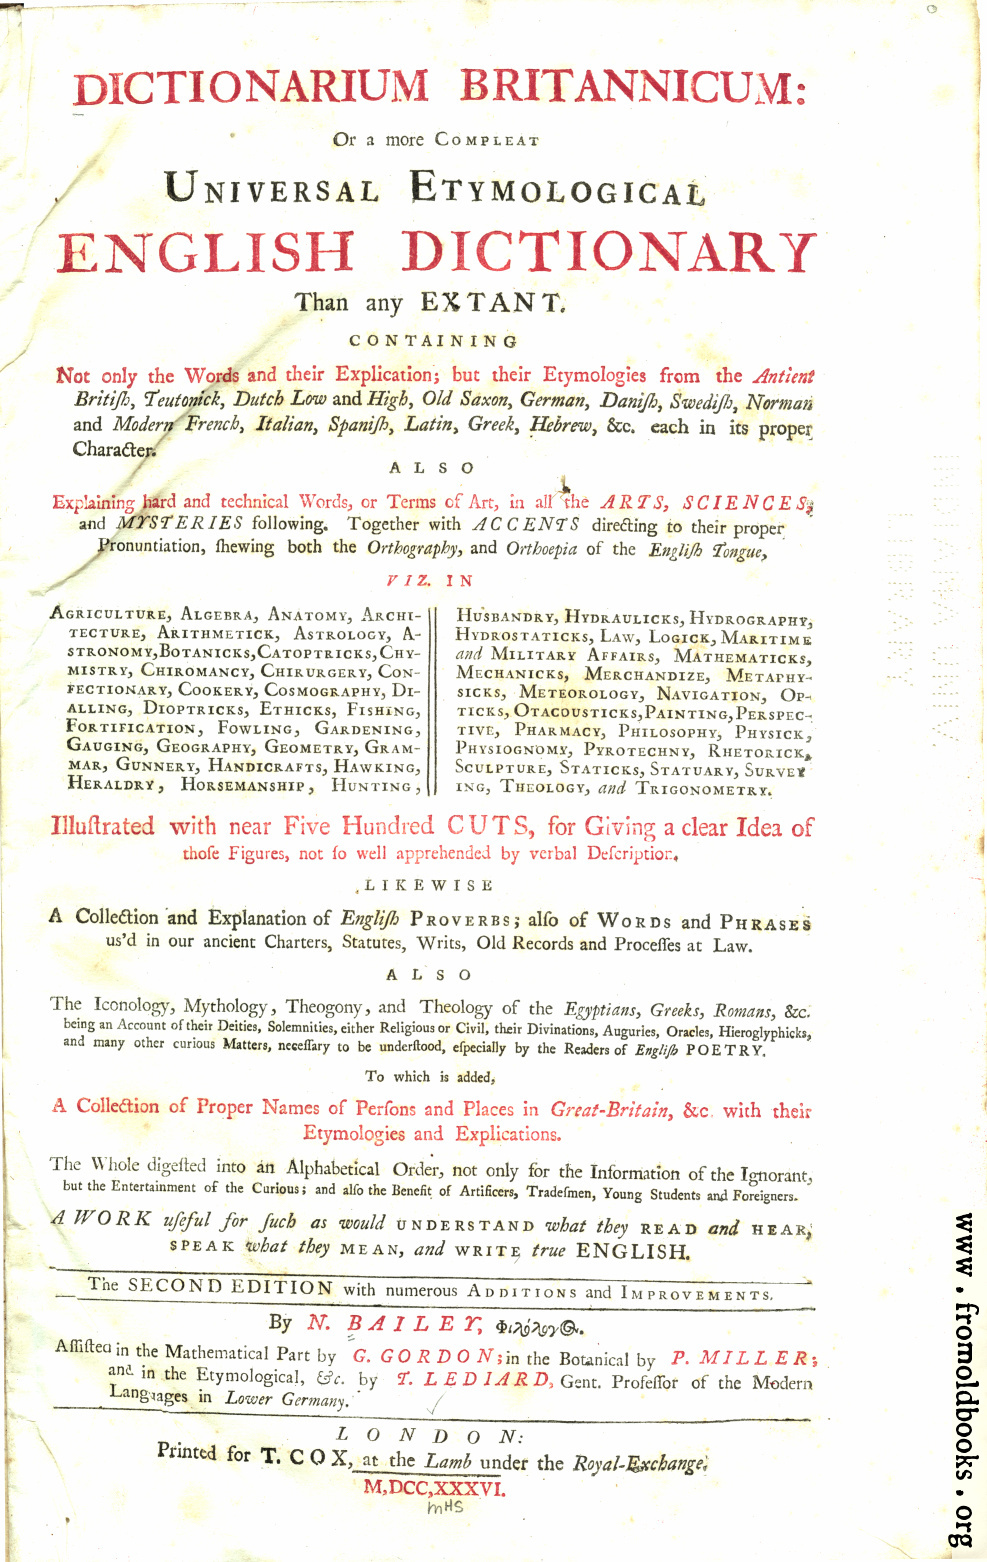 [Picture: Title Page: Bailey’s Universal Etymological Dictionary]